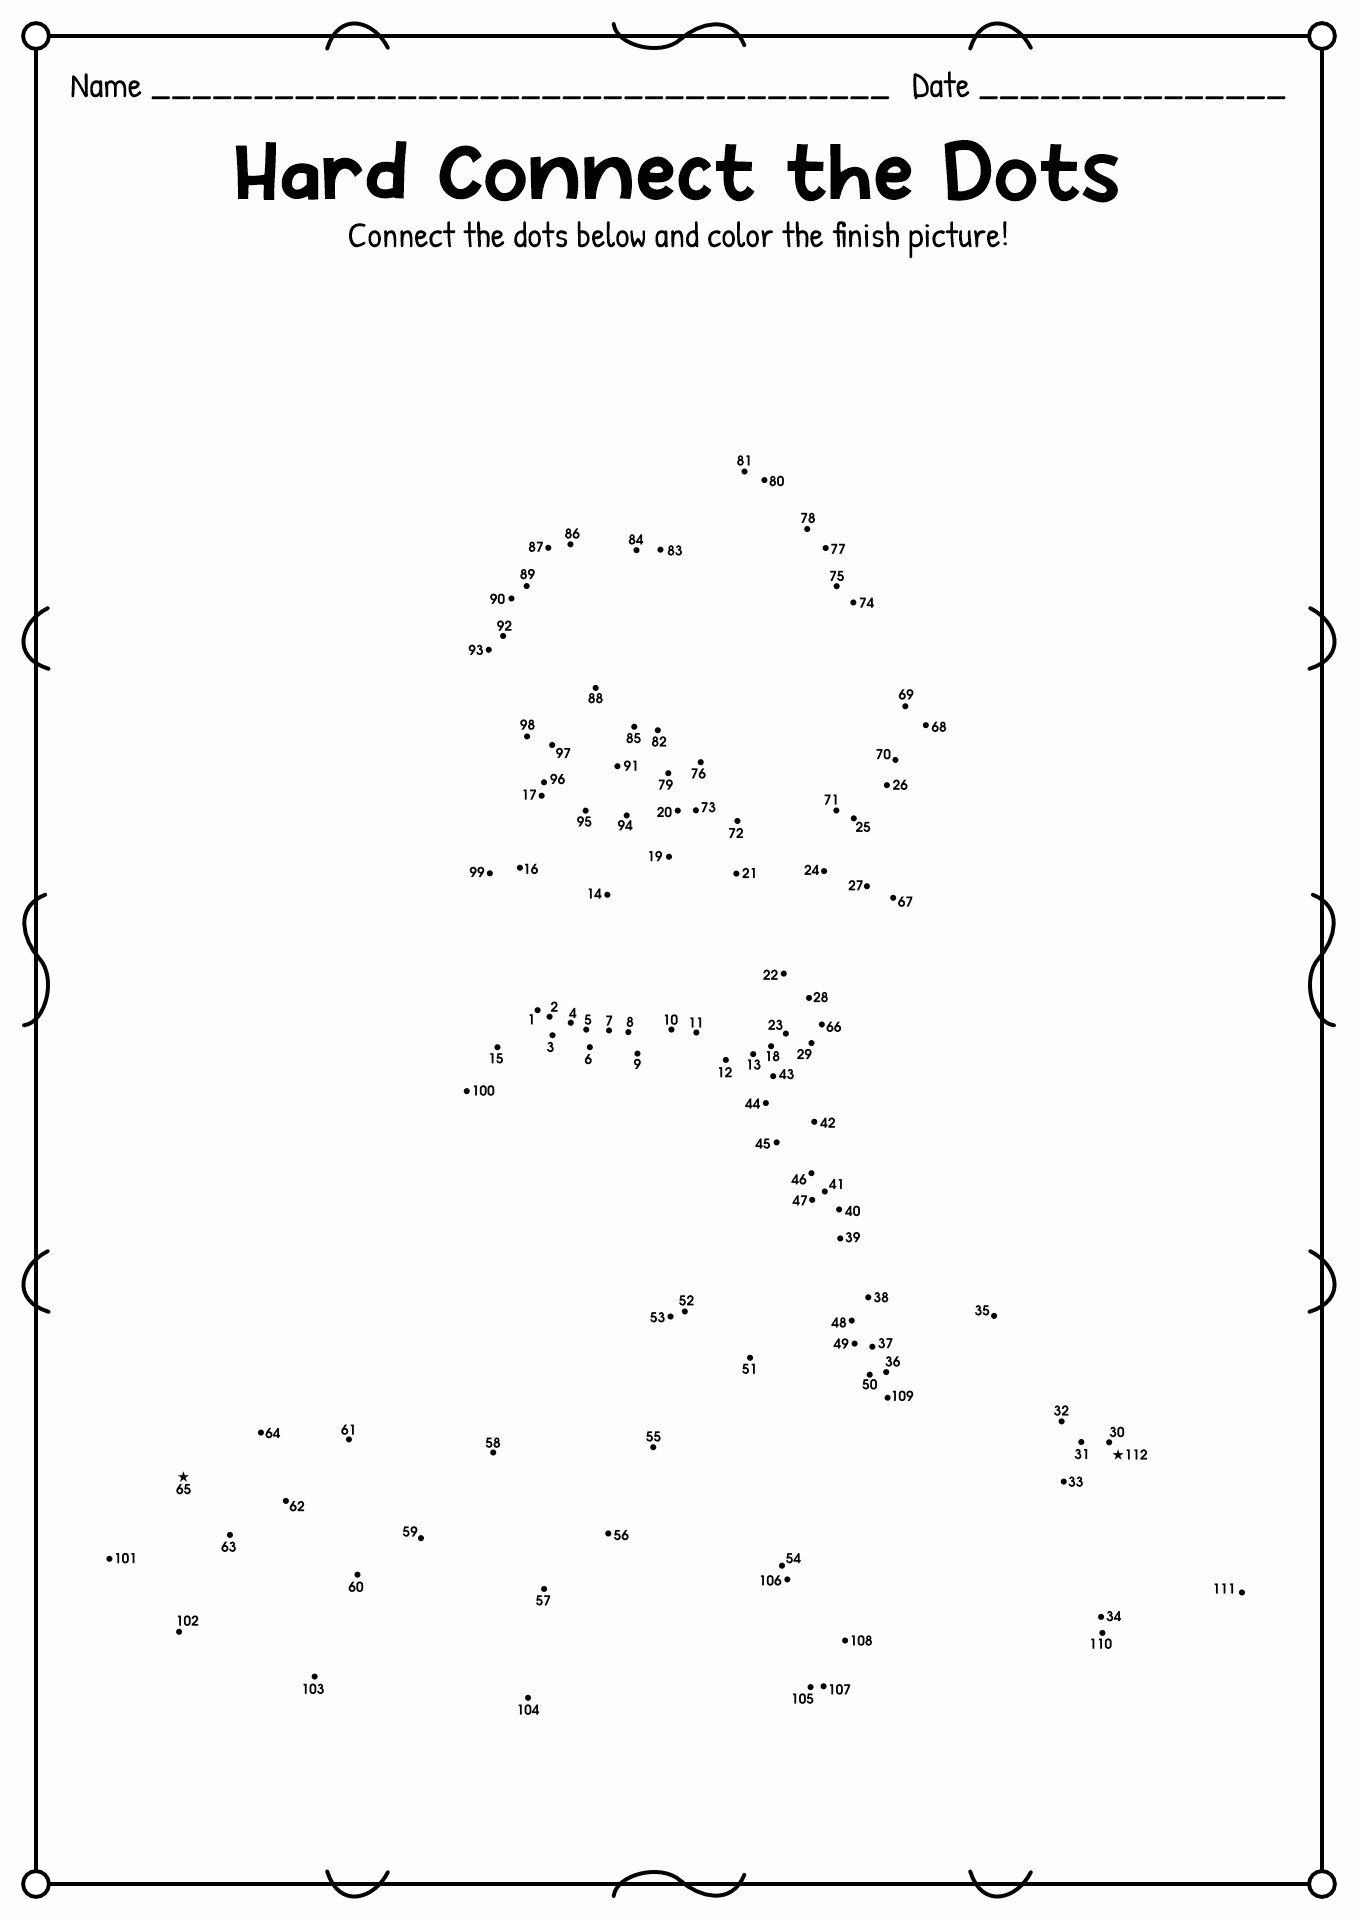 jacomijntje-franse-50-awesome-tips-about-printable-dot-to-dot